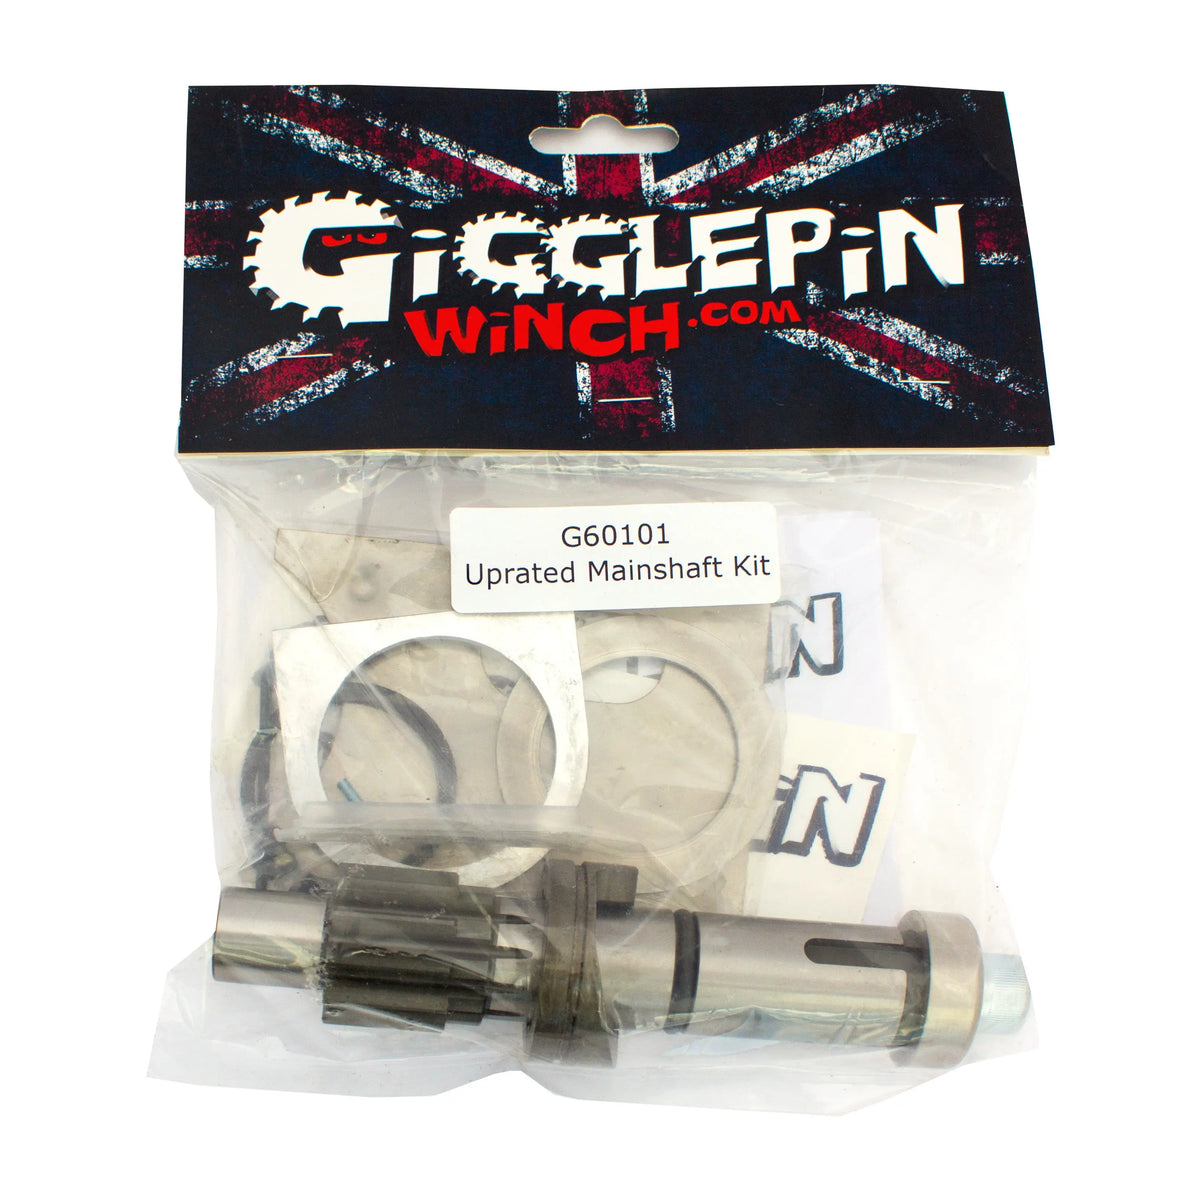 Gigglepin HEAVY DUTY UP-RATED MAINSHAFT KIT G60101 Gigglepin